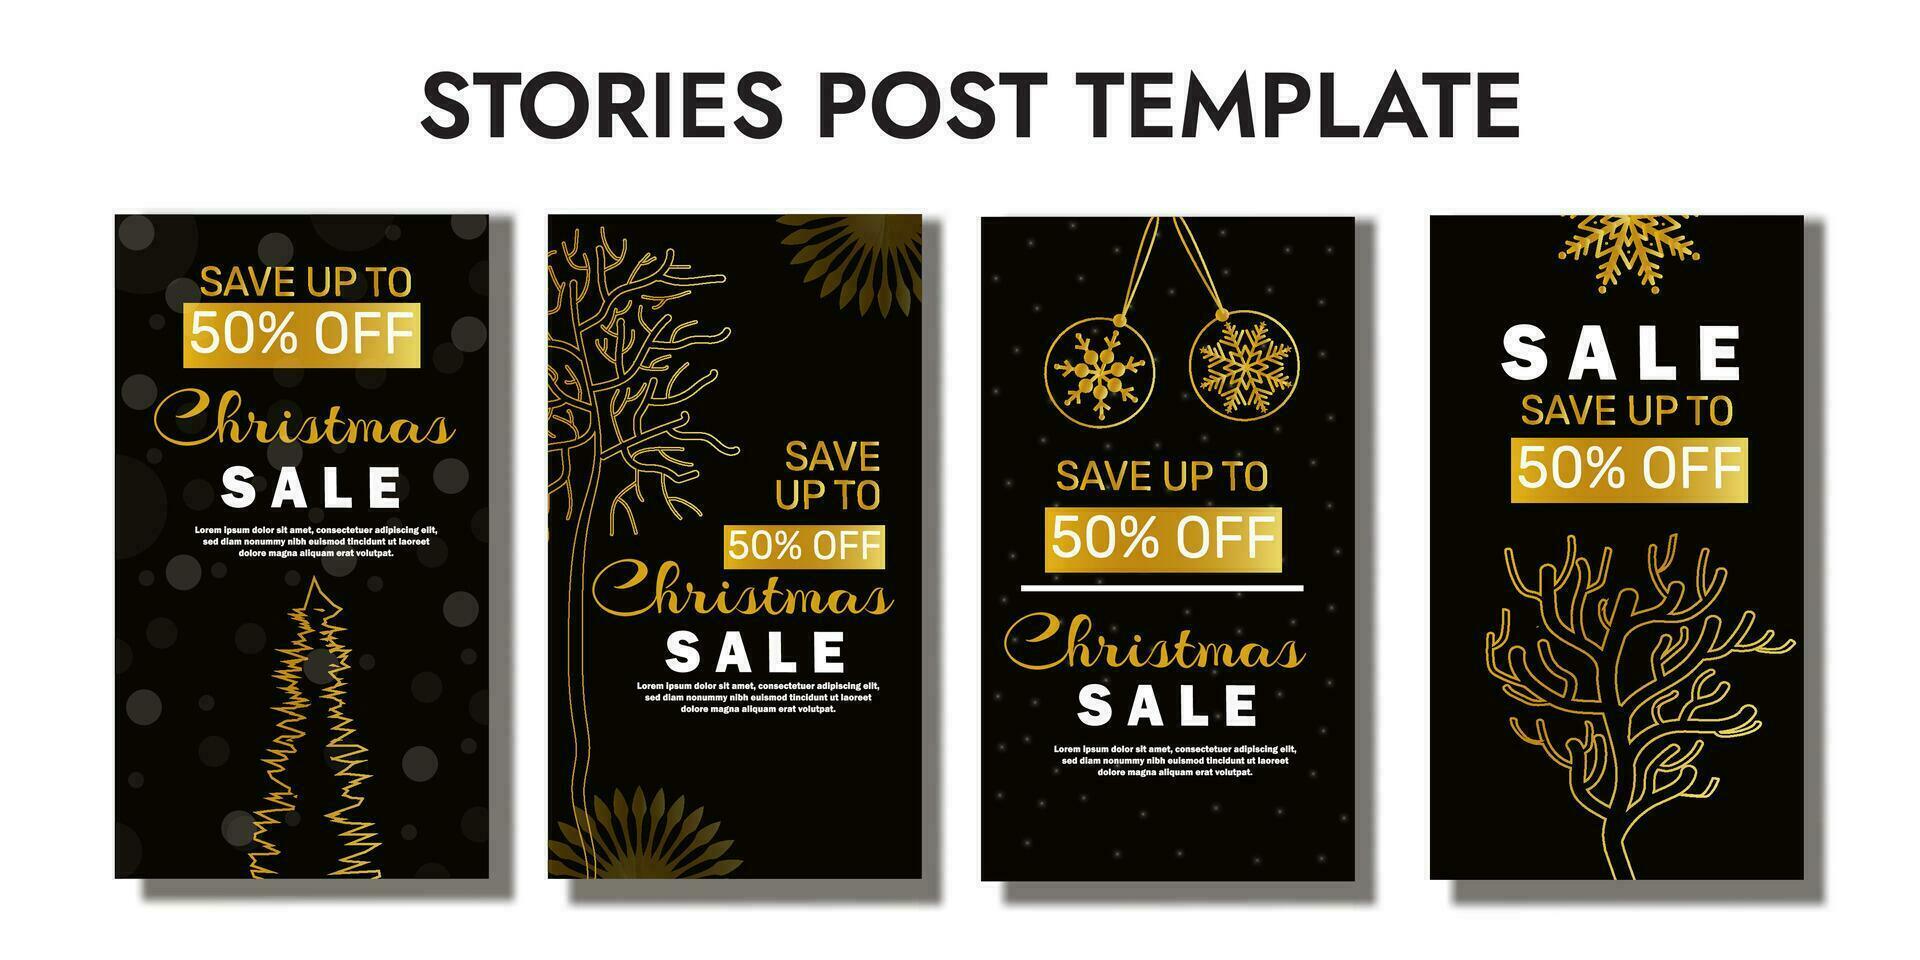 luxury christmas background, Flat stories template, chirstmas greeting illustration, stories collection for christmas editable template, greeting card stories template, portrait Christmas background, vector